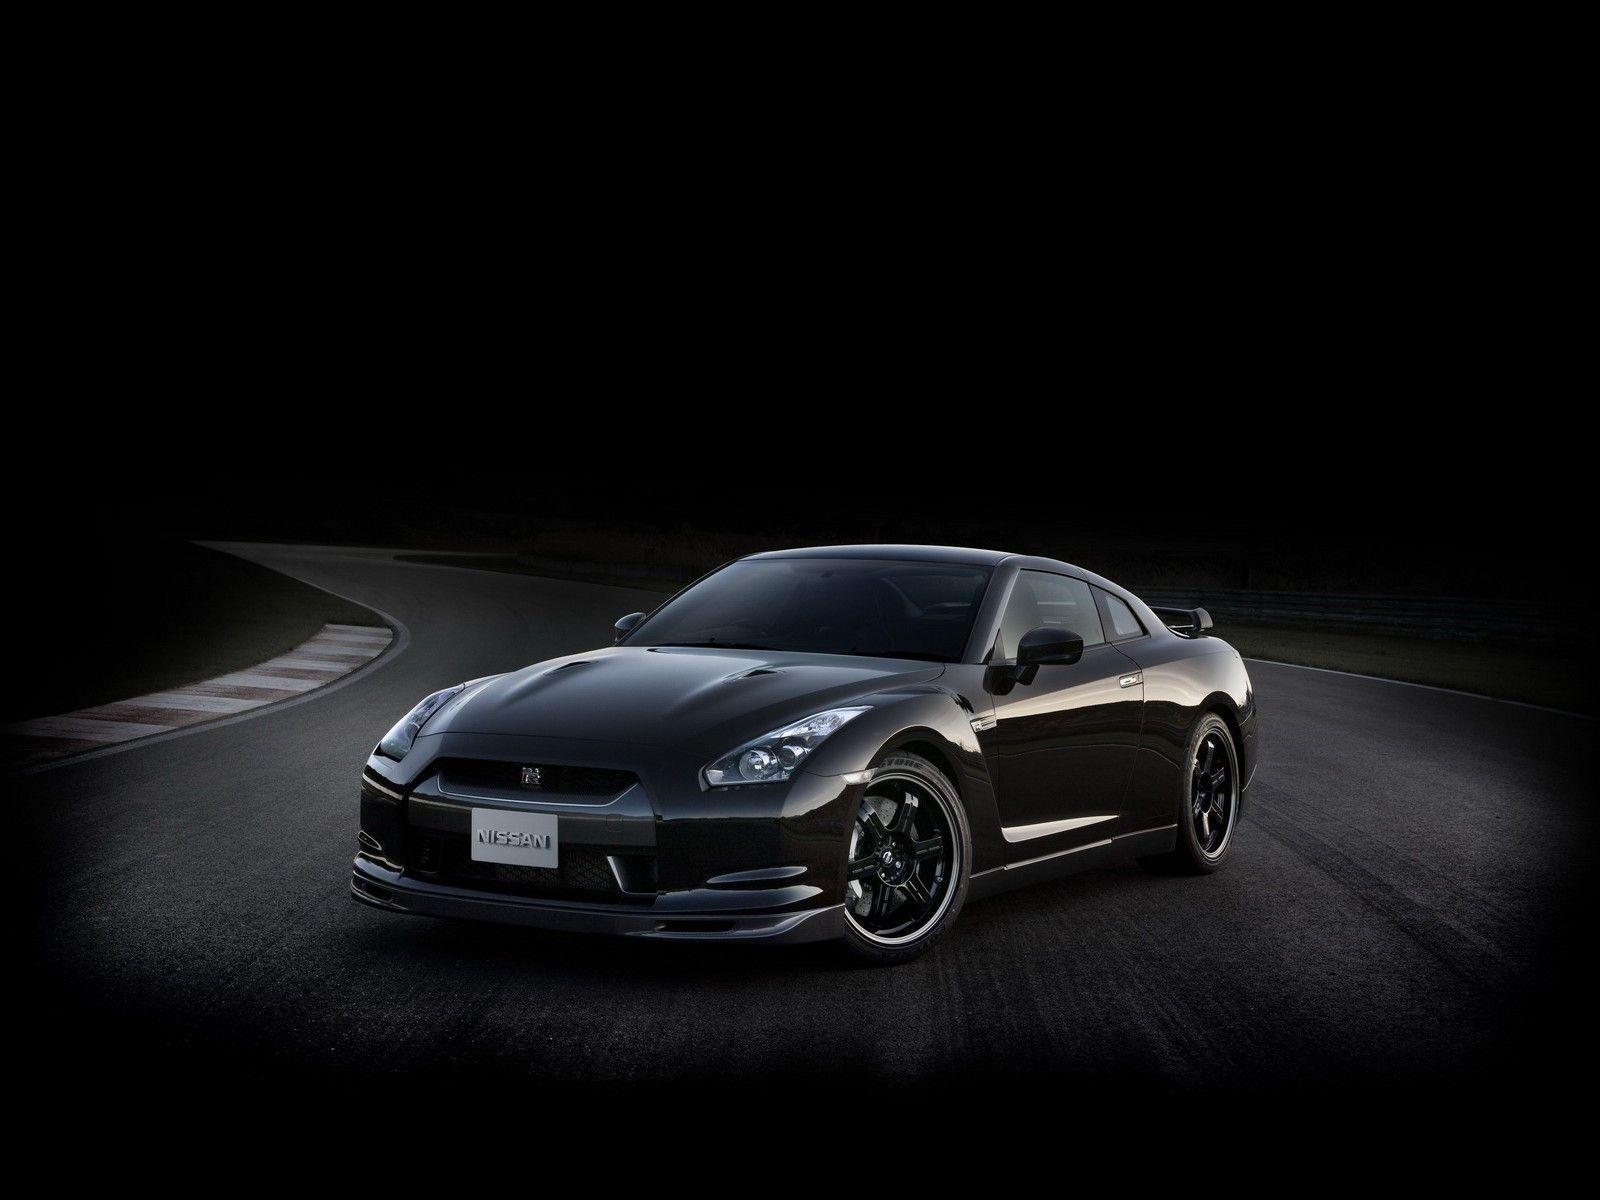 Nissan GT R SpecV Photo And Wallpaper